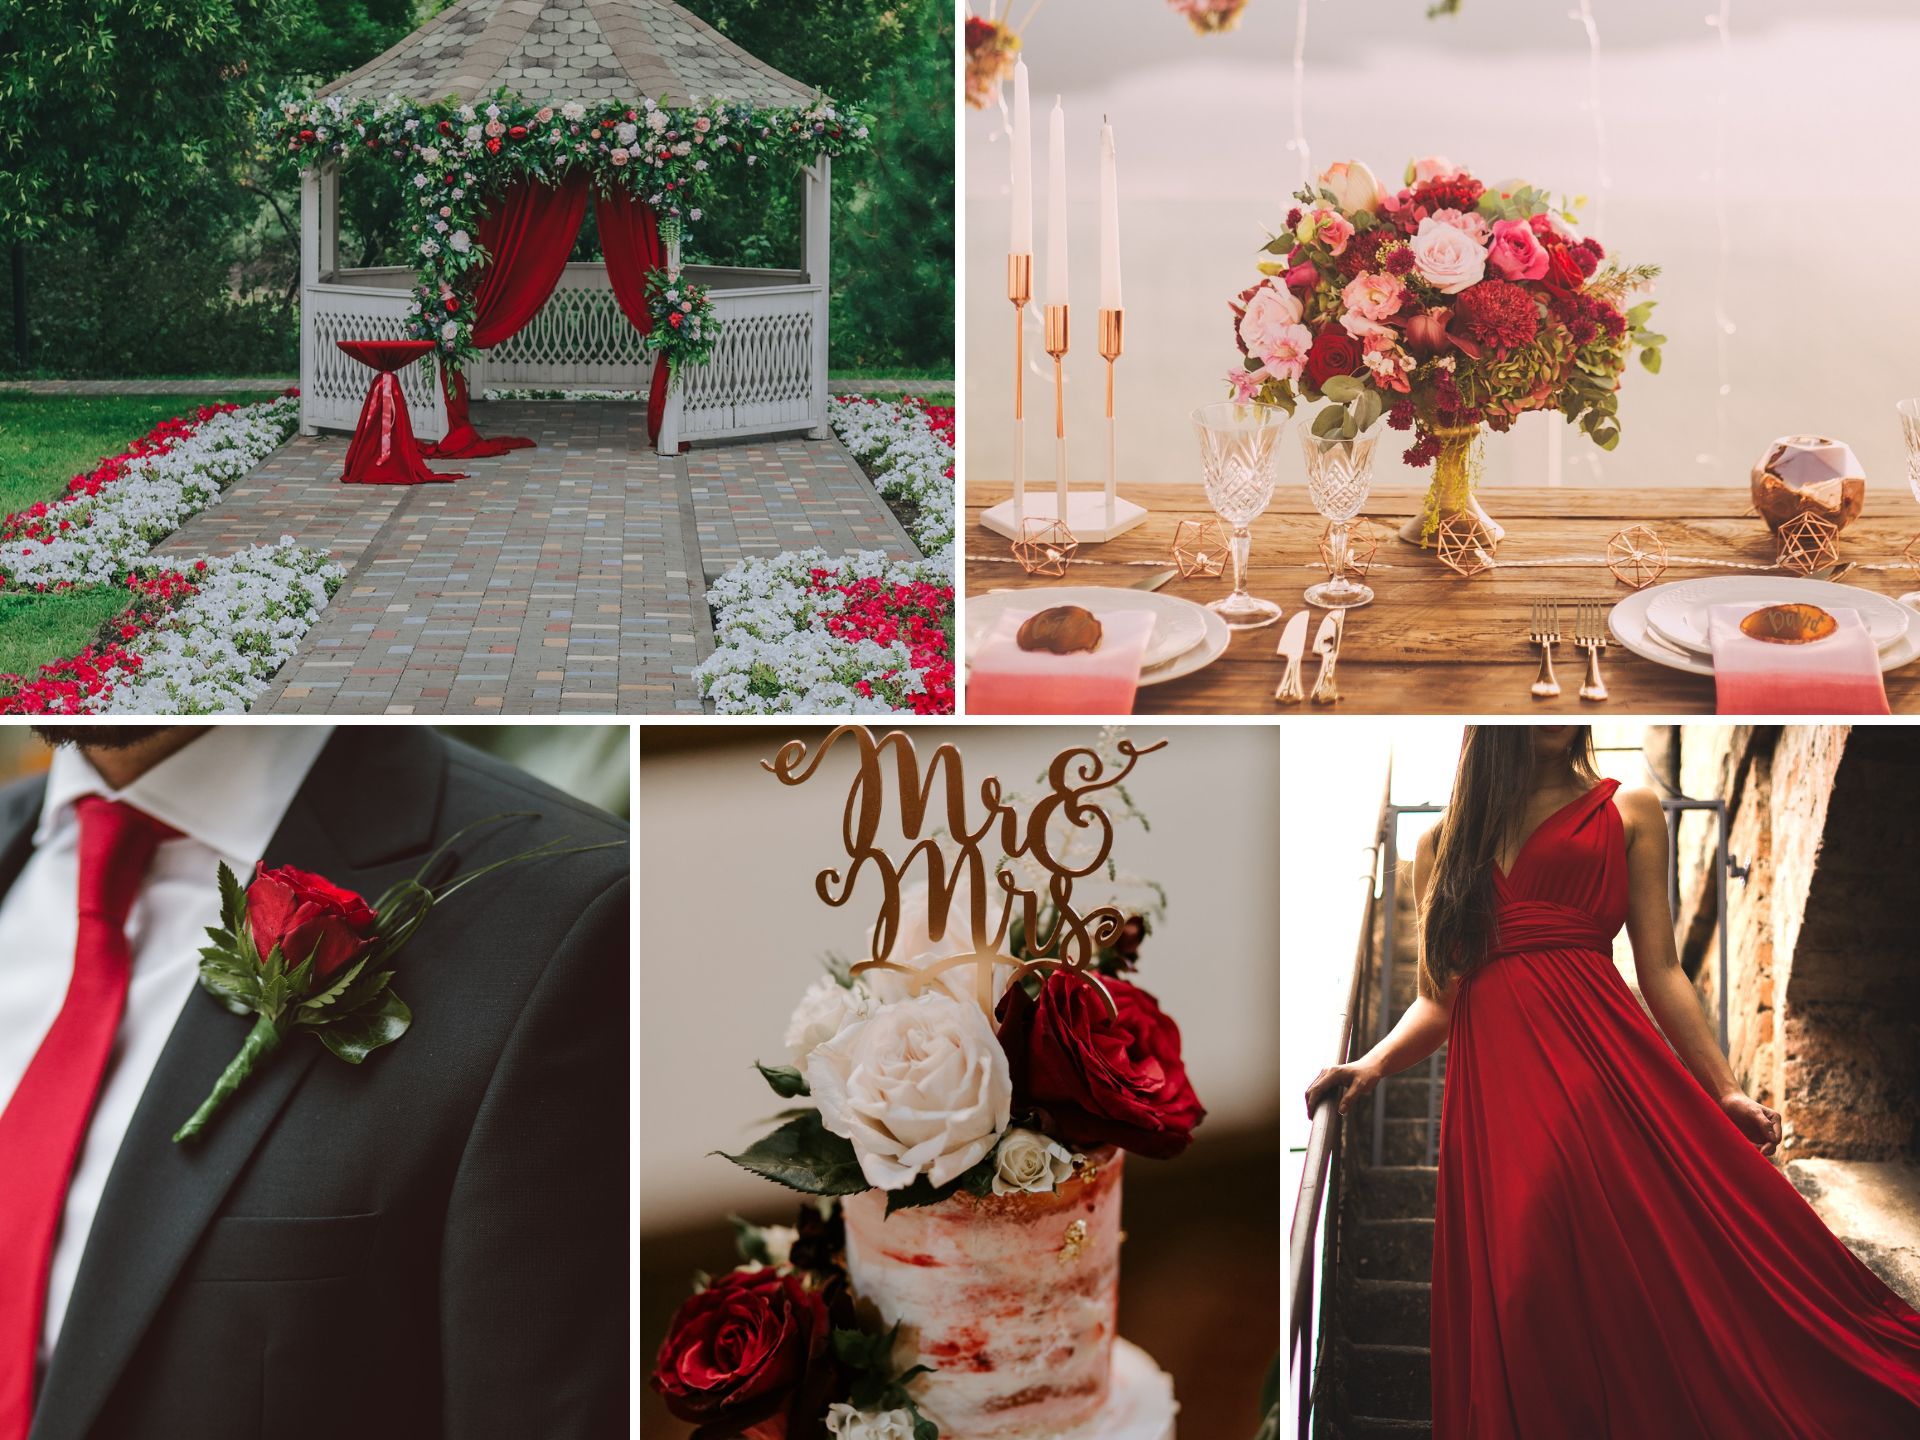 A photo collage with red wedding color ideas.